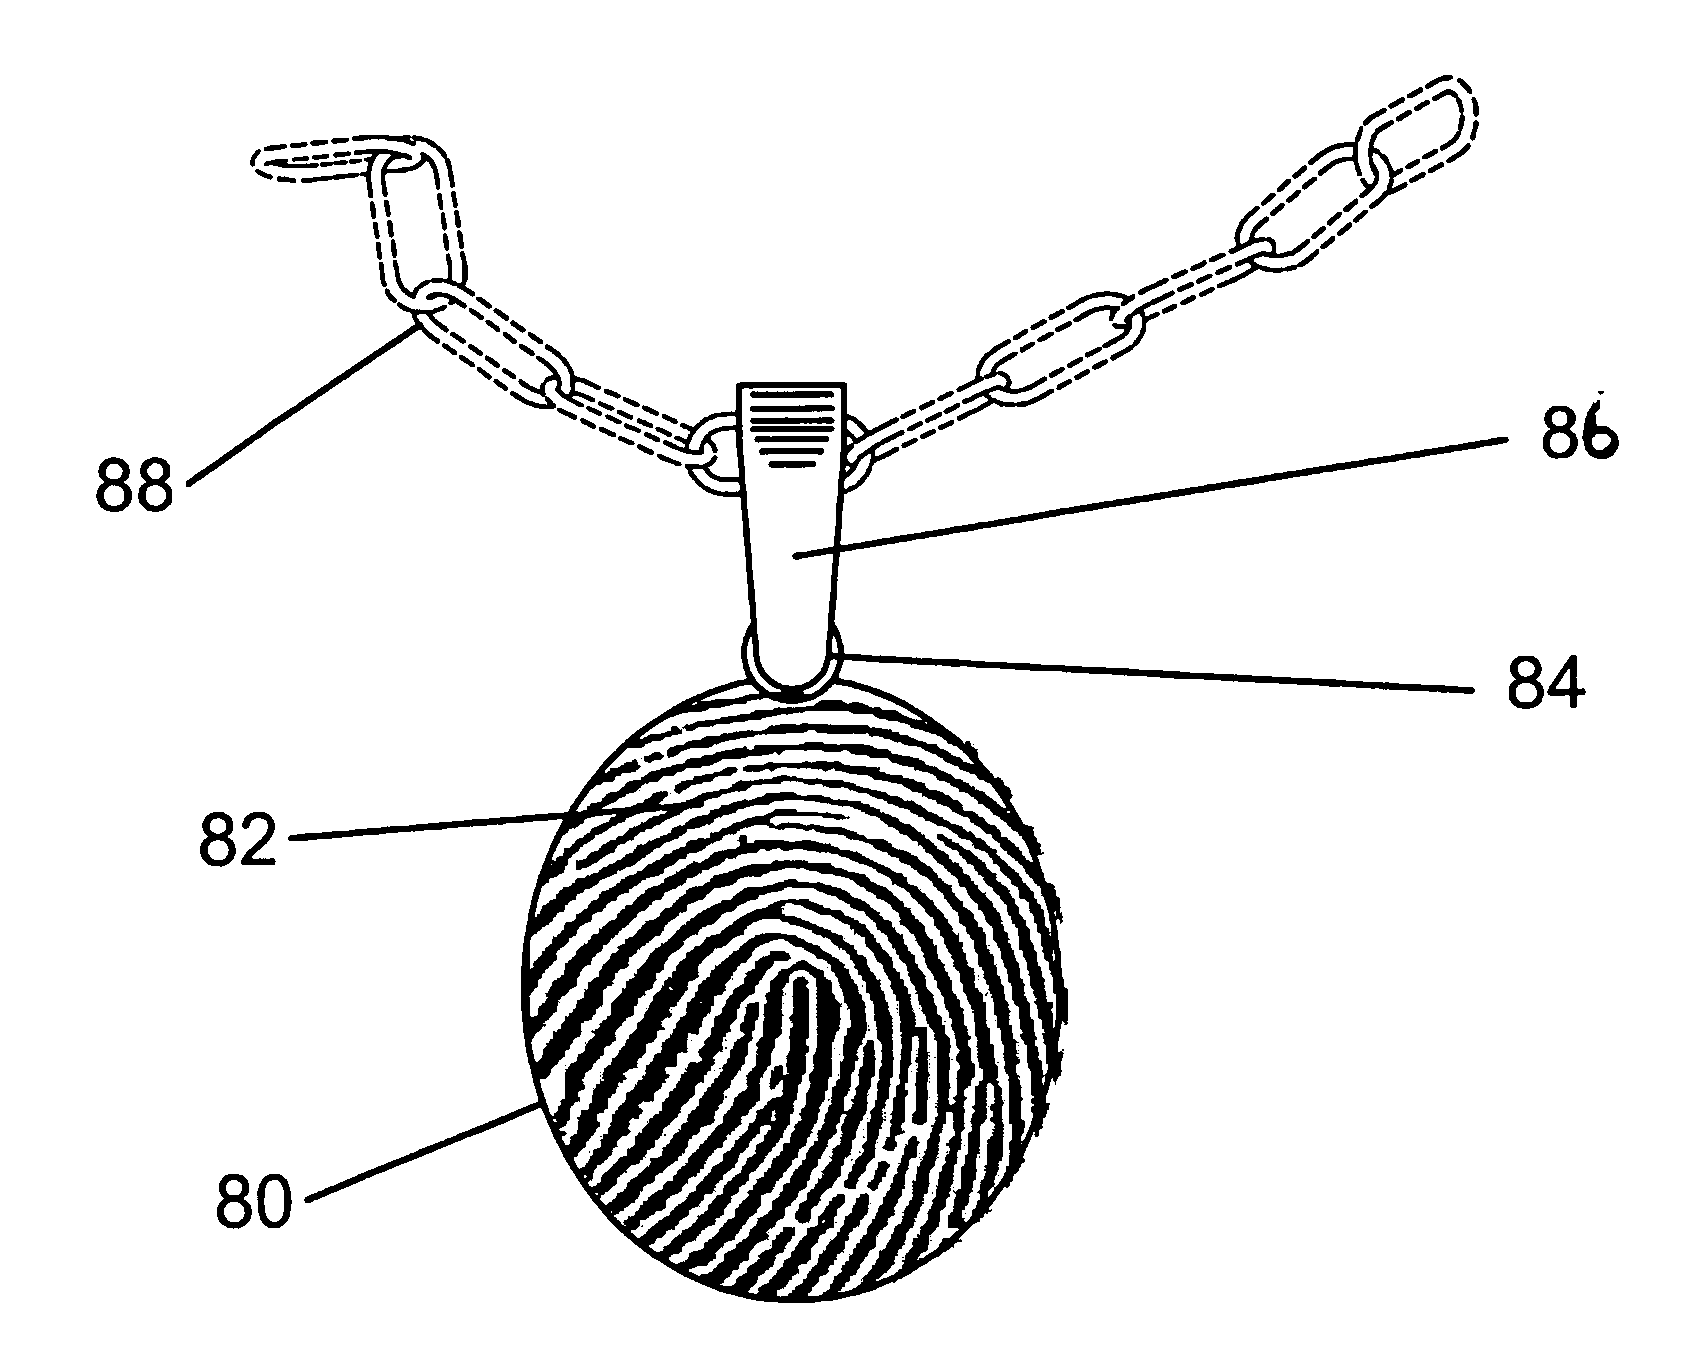 Article of Jewelry and Method of Manufacture